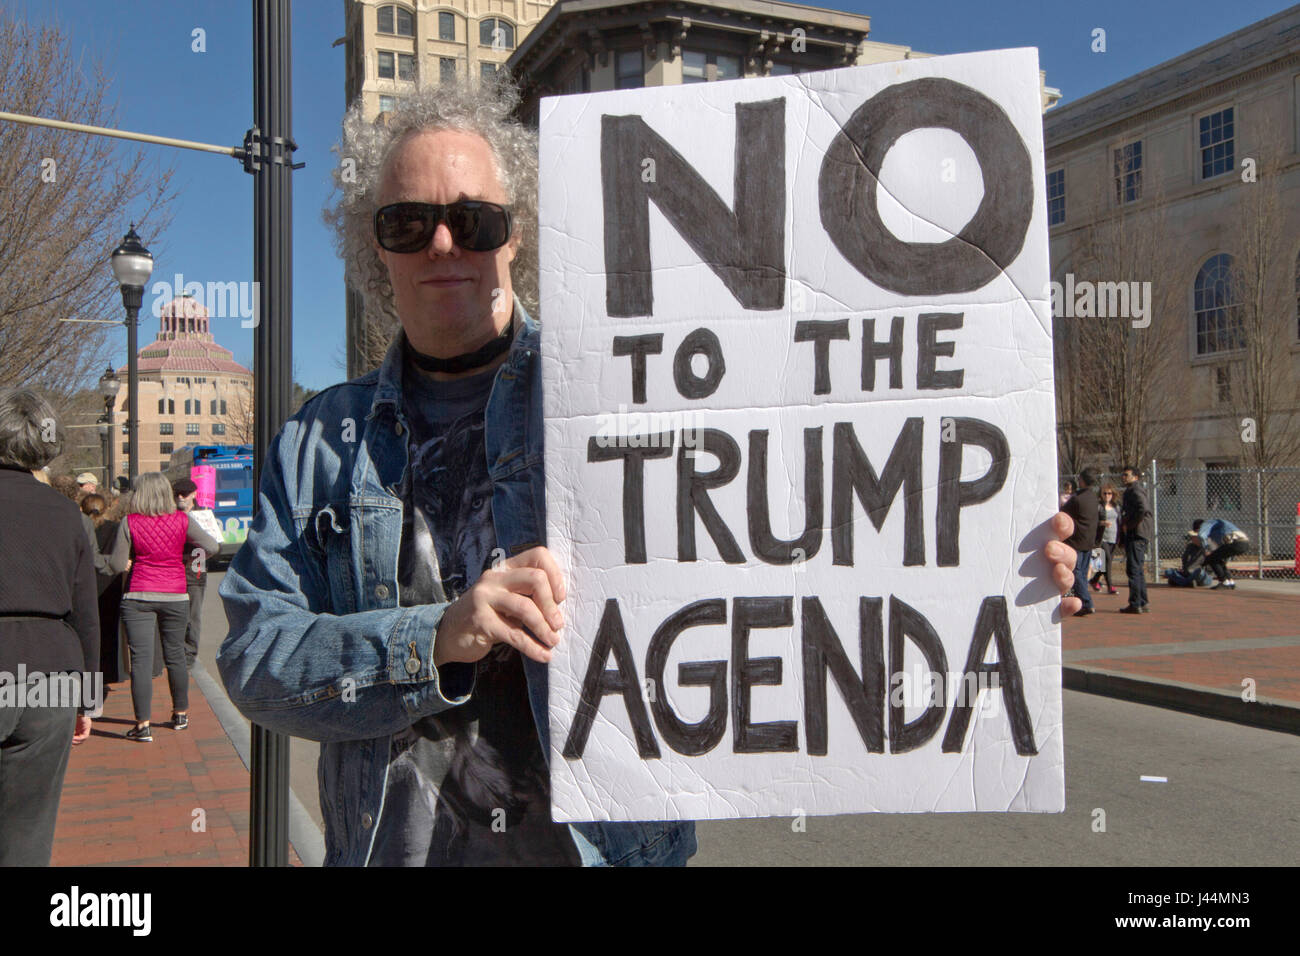 Asheville, North Carolina, USA - February 25, 2017: Male political demonstrator at an Affordable Care Act rally holds a sign saying 'NO to the Trump A Stock Photo